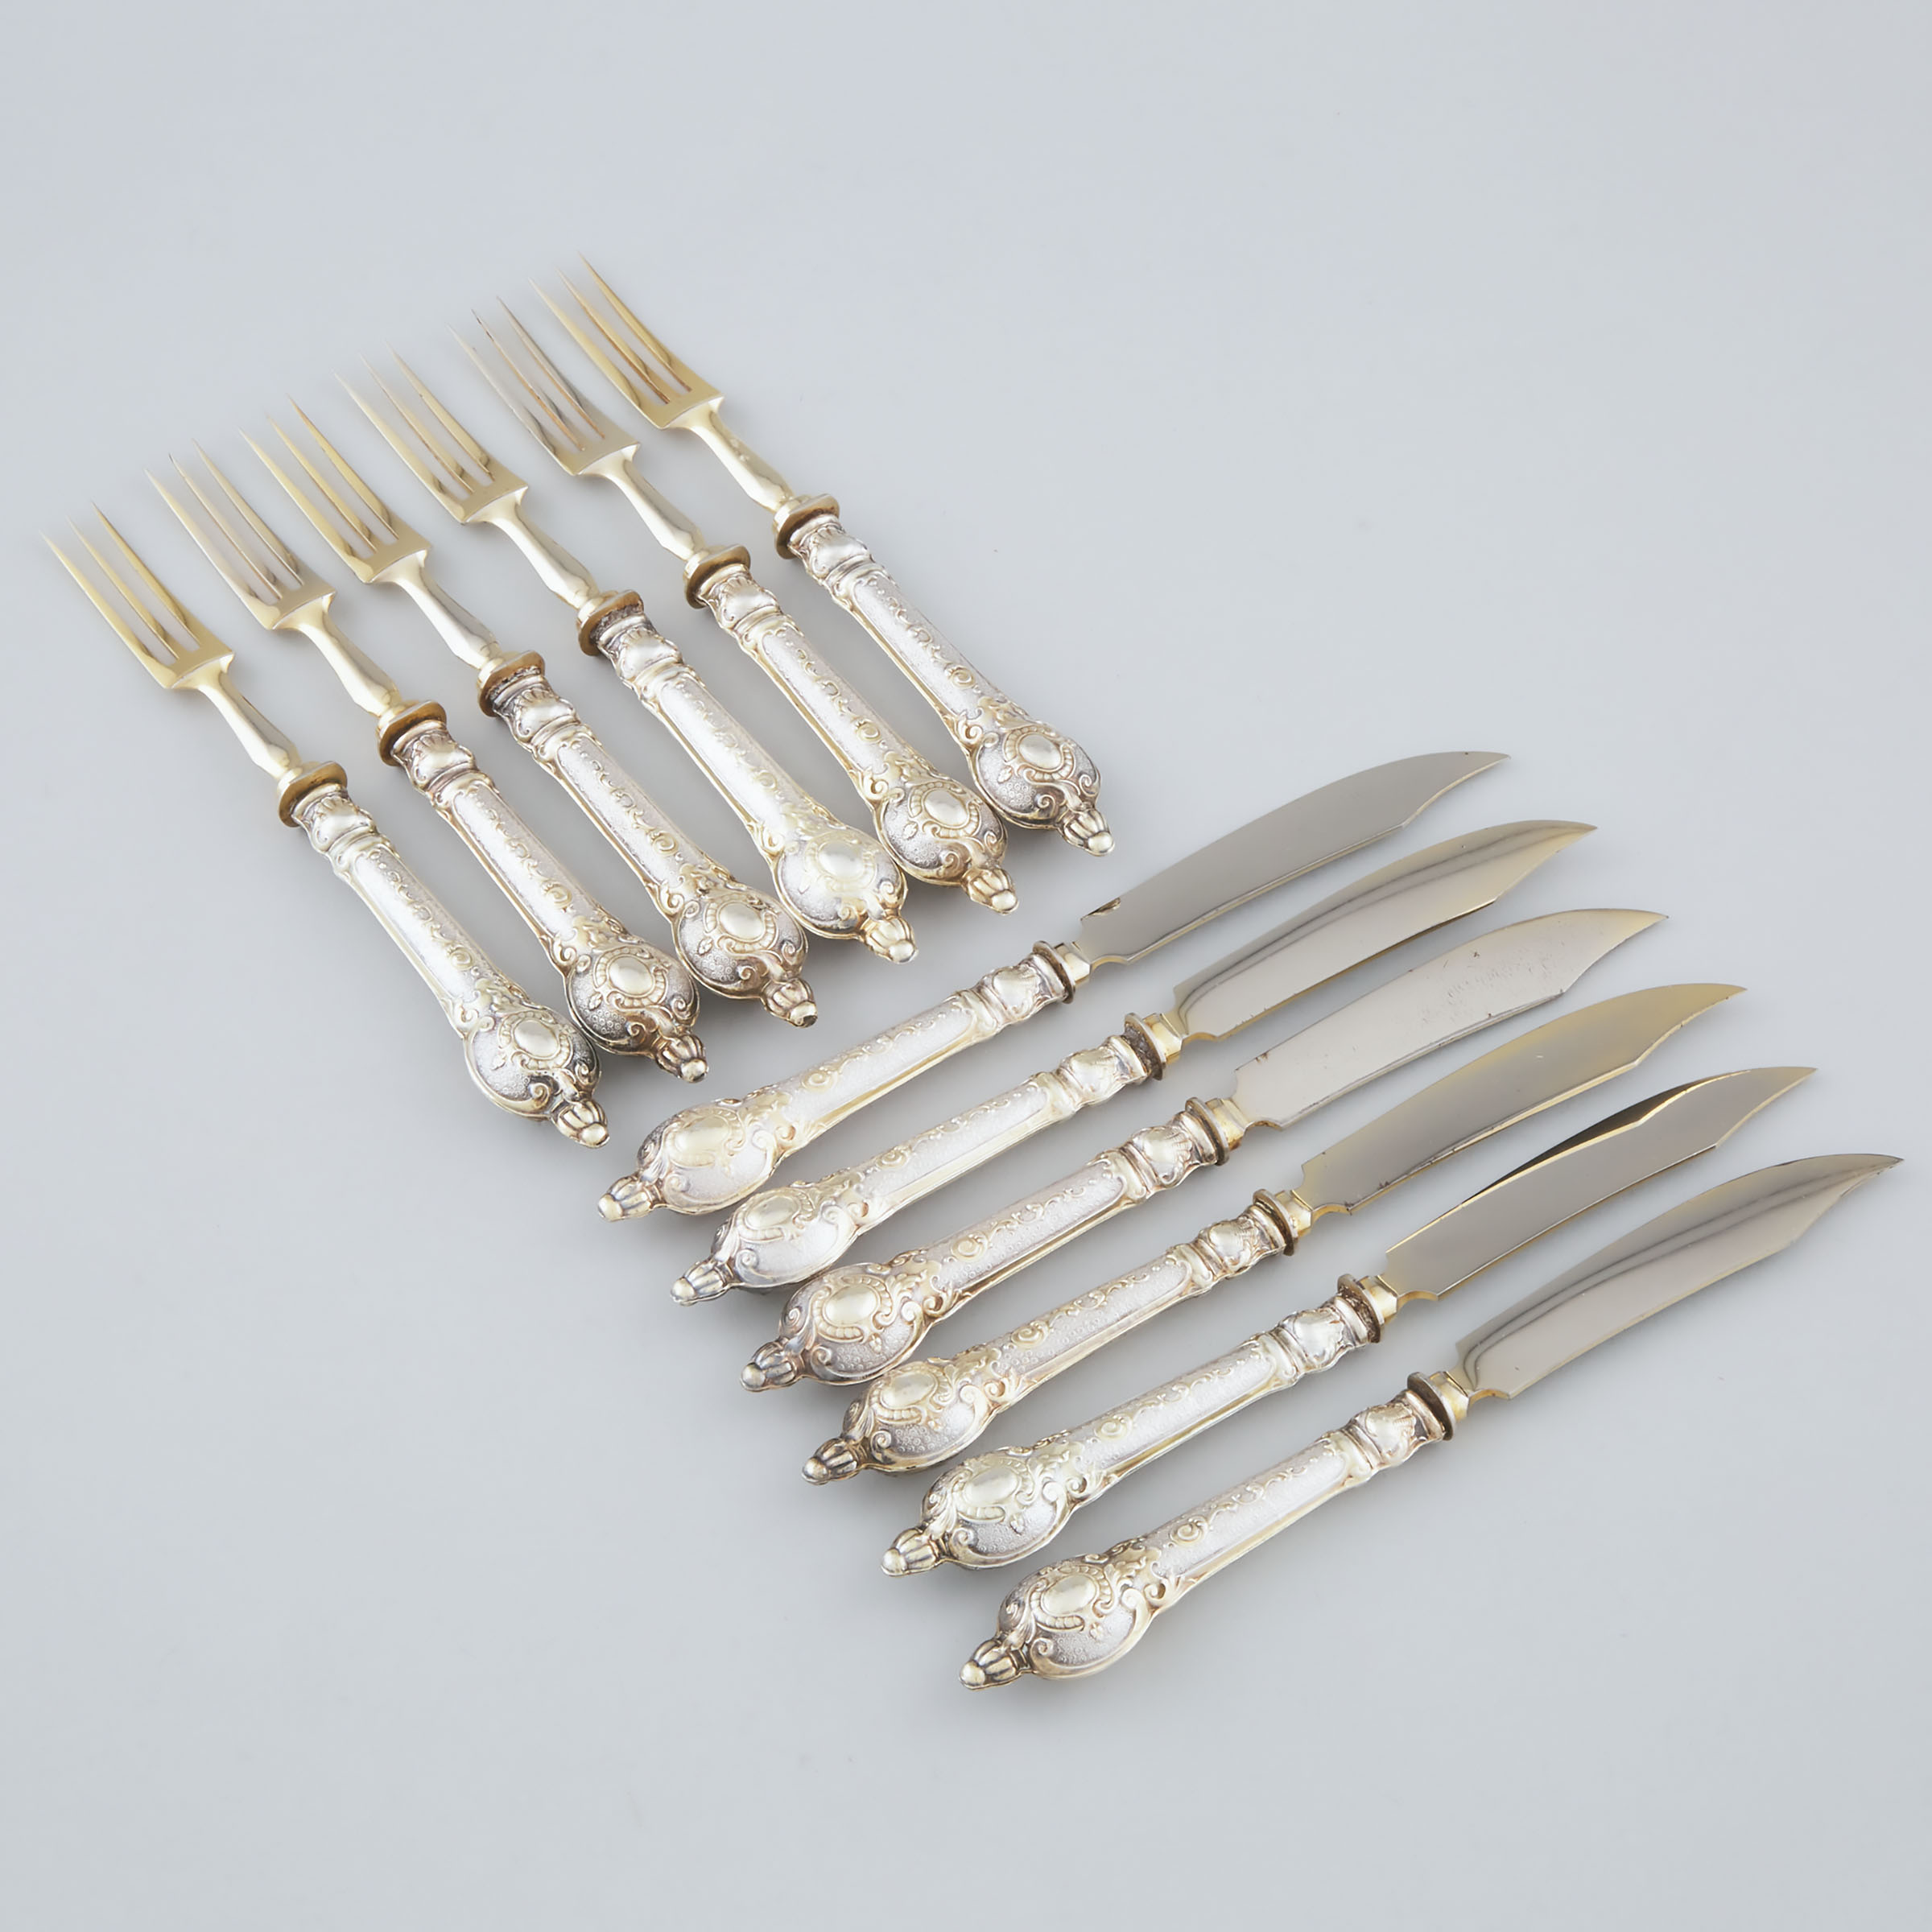 Six German Silver-Gilt Handled Fruit Knives and Six Forks, c.1900